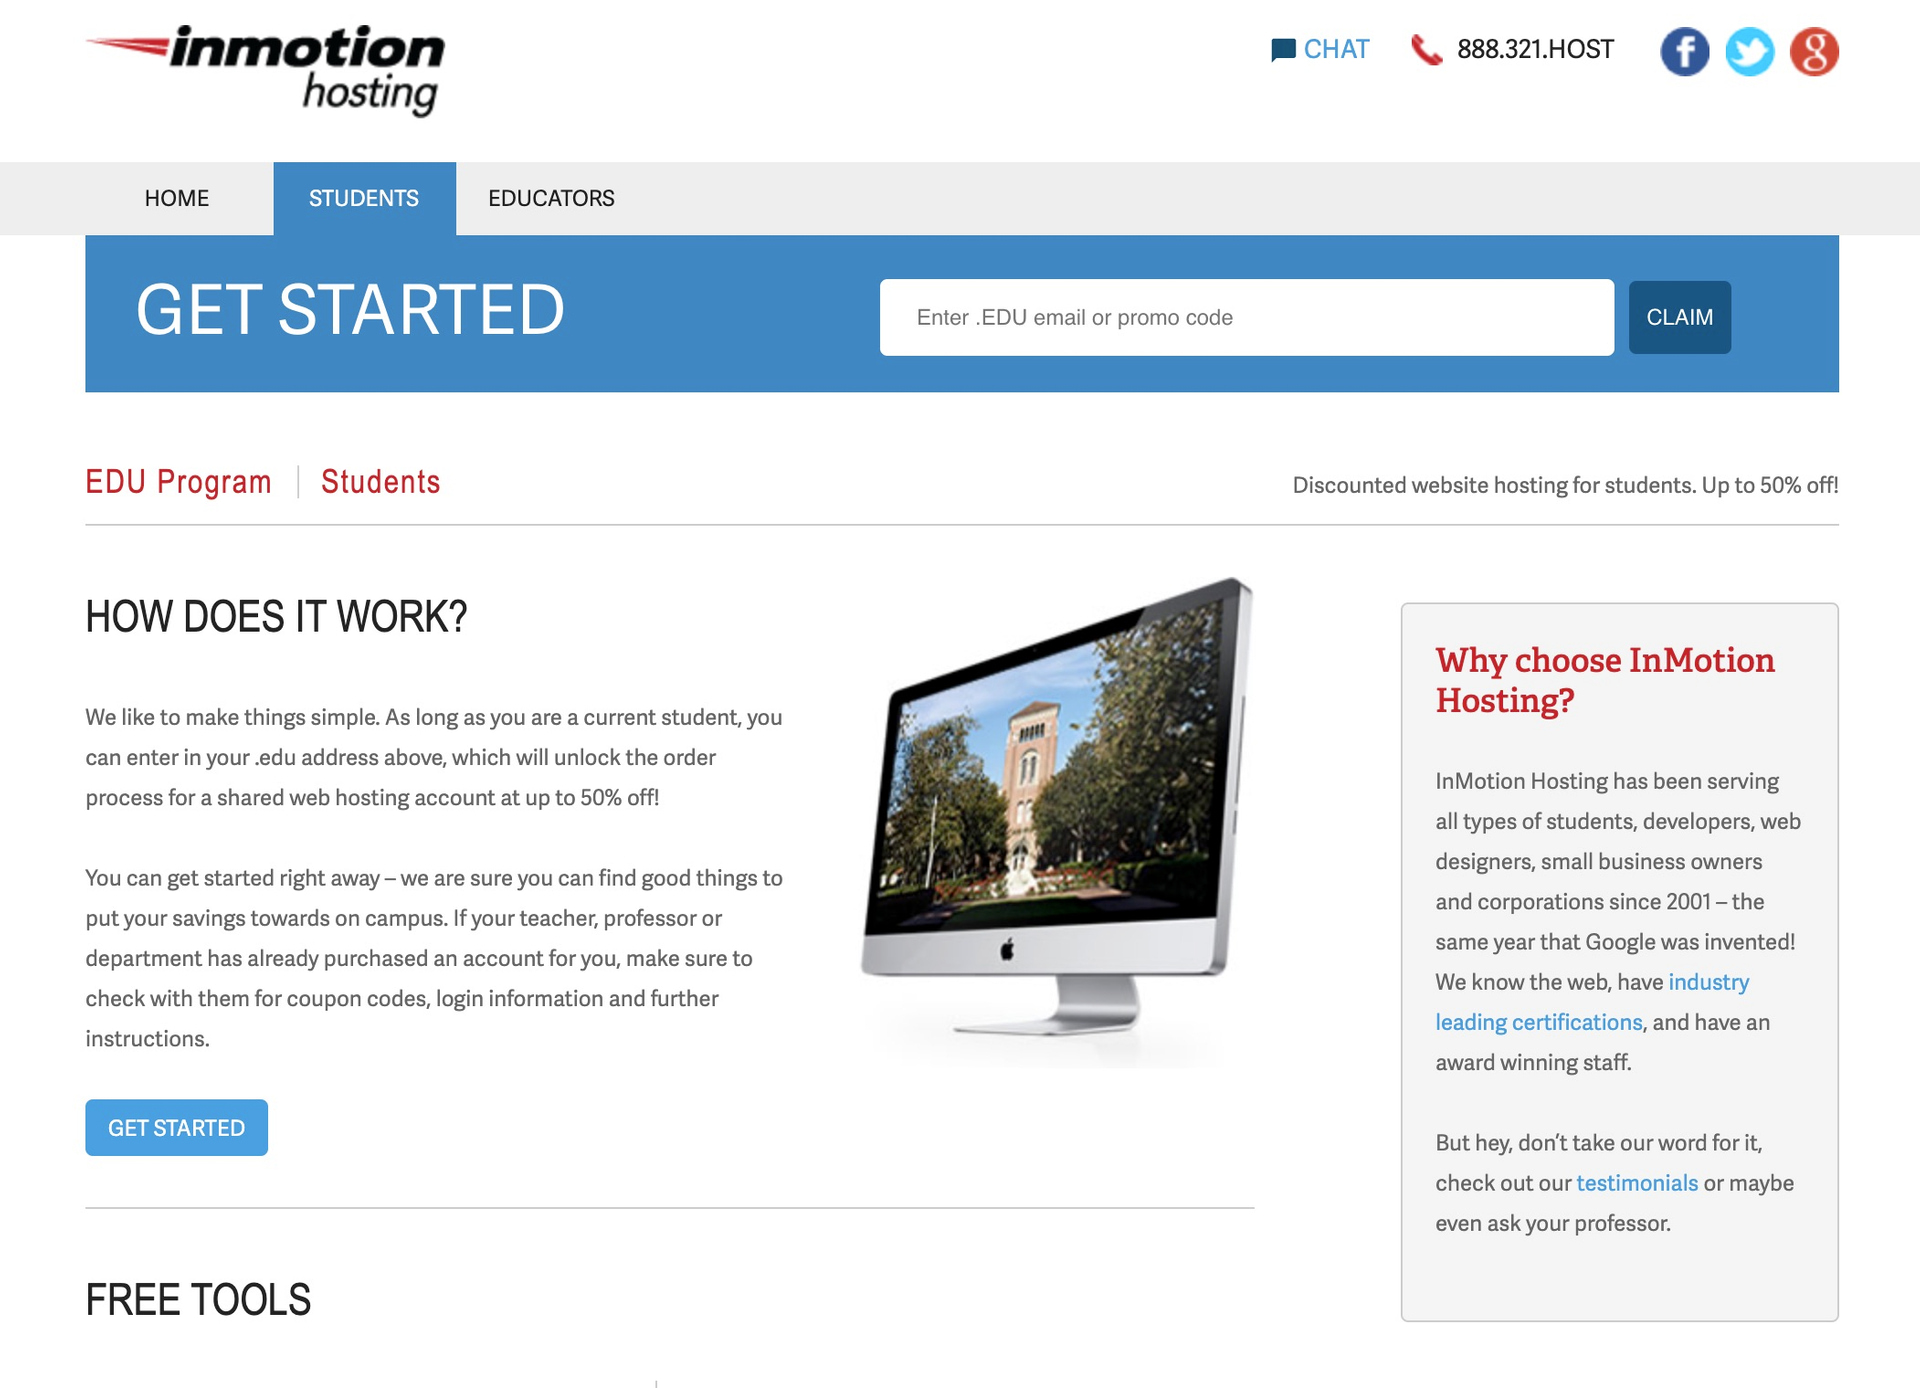 The details for InMotion's student discounted hosting